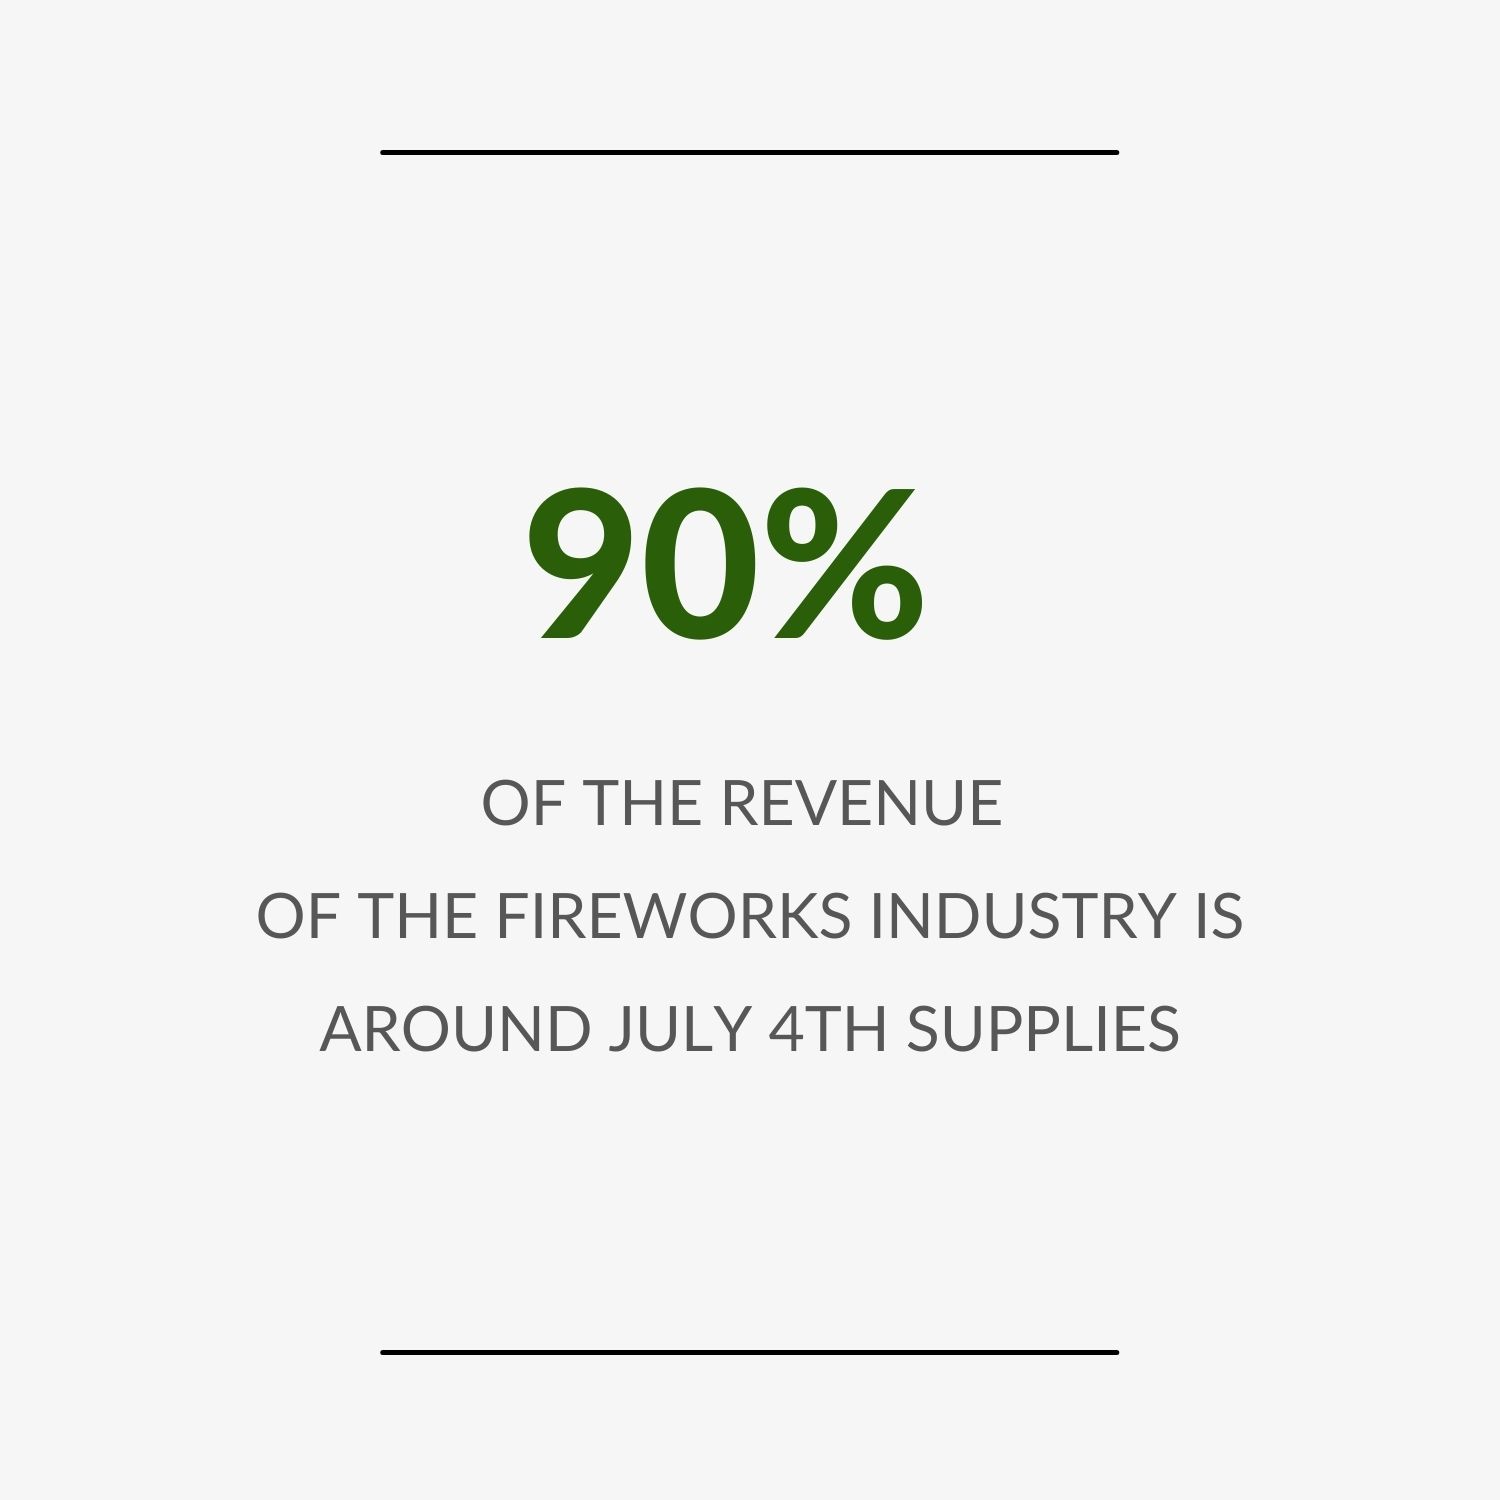 Fact - 90% of the revenue of the fireworks industry is around July 4th supplies.